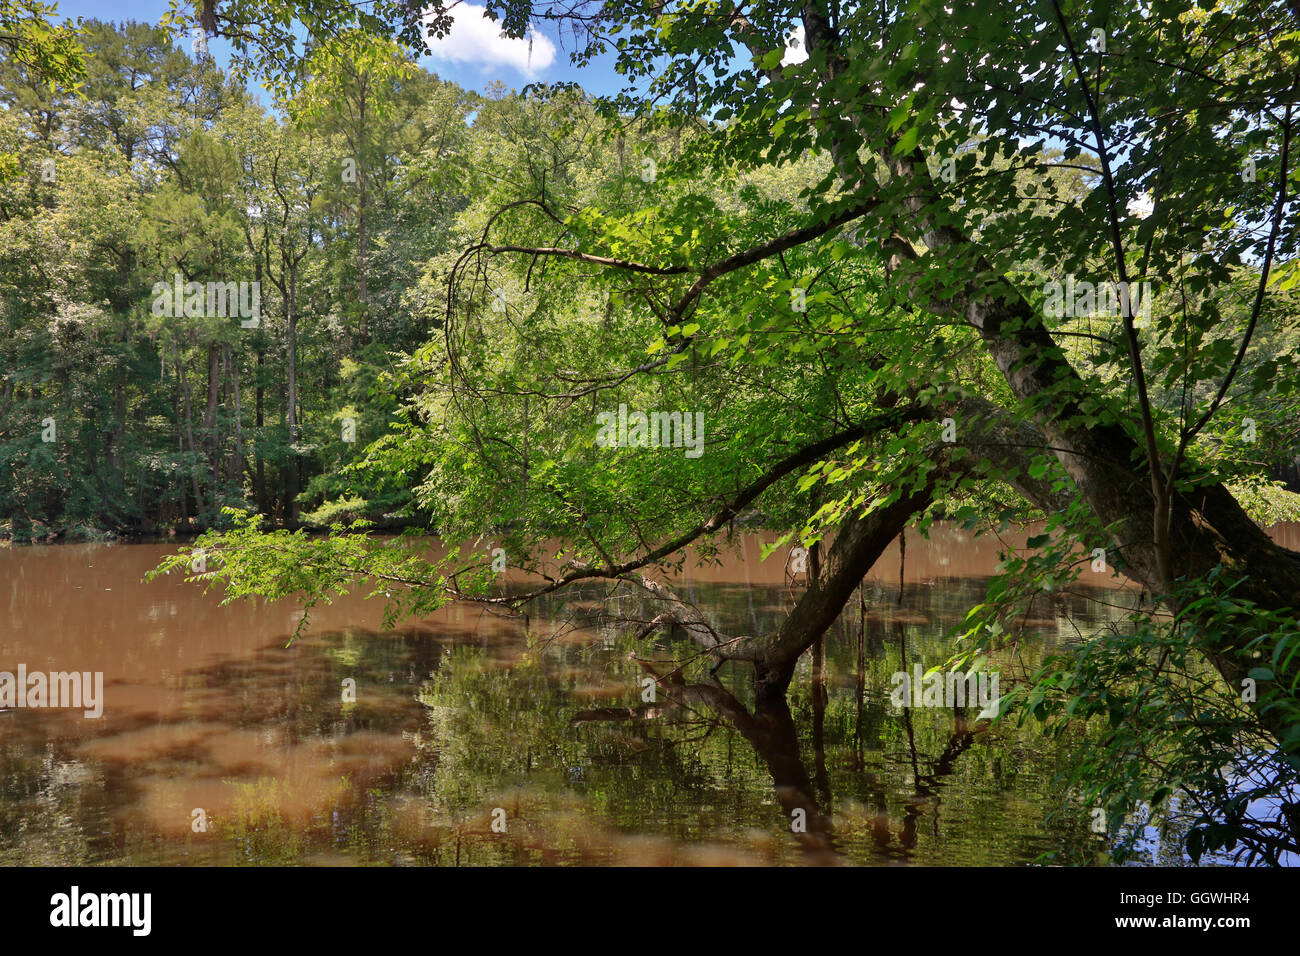 CONGAREE NATIONAL PARK is known for its pristine natural environment - SOUTH, CAROLINA Stock Photo